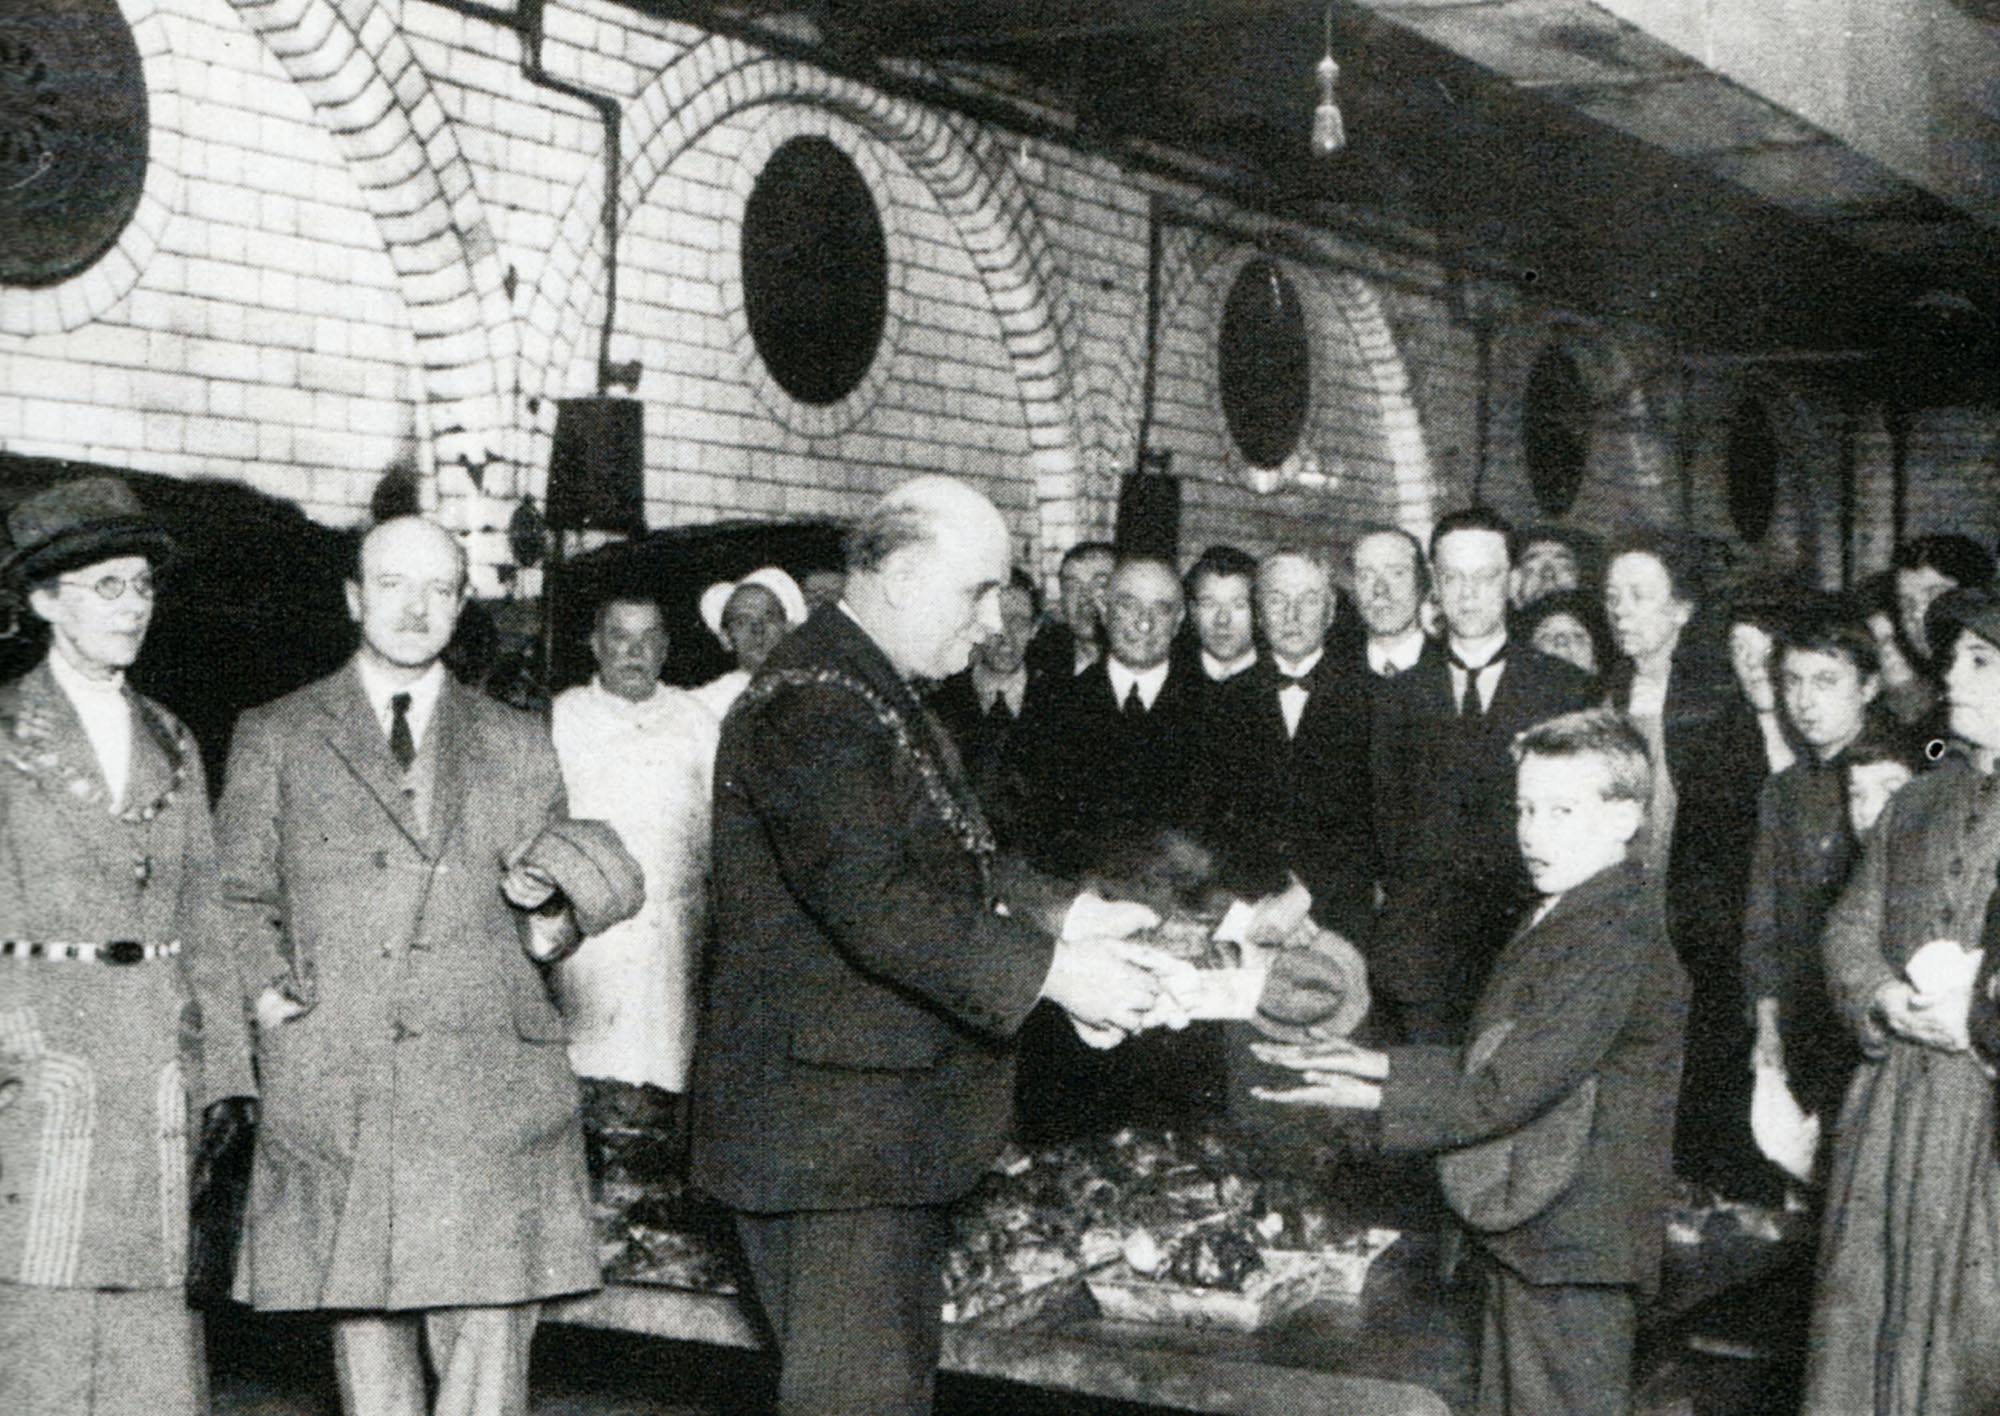 Mayor of Leicester Amos Sherriff handing out Christmas food parcels at the workhouse, c1920 - Leicestershire, Leicester and Rutland Record Office